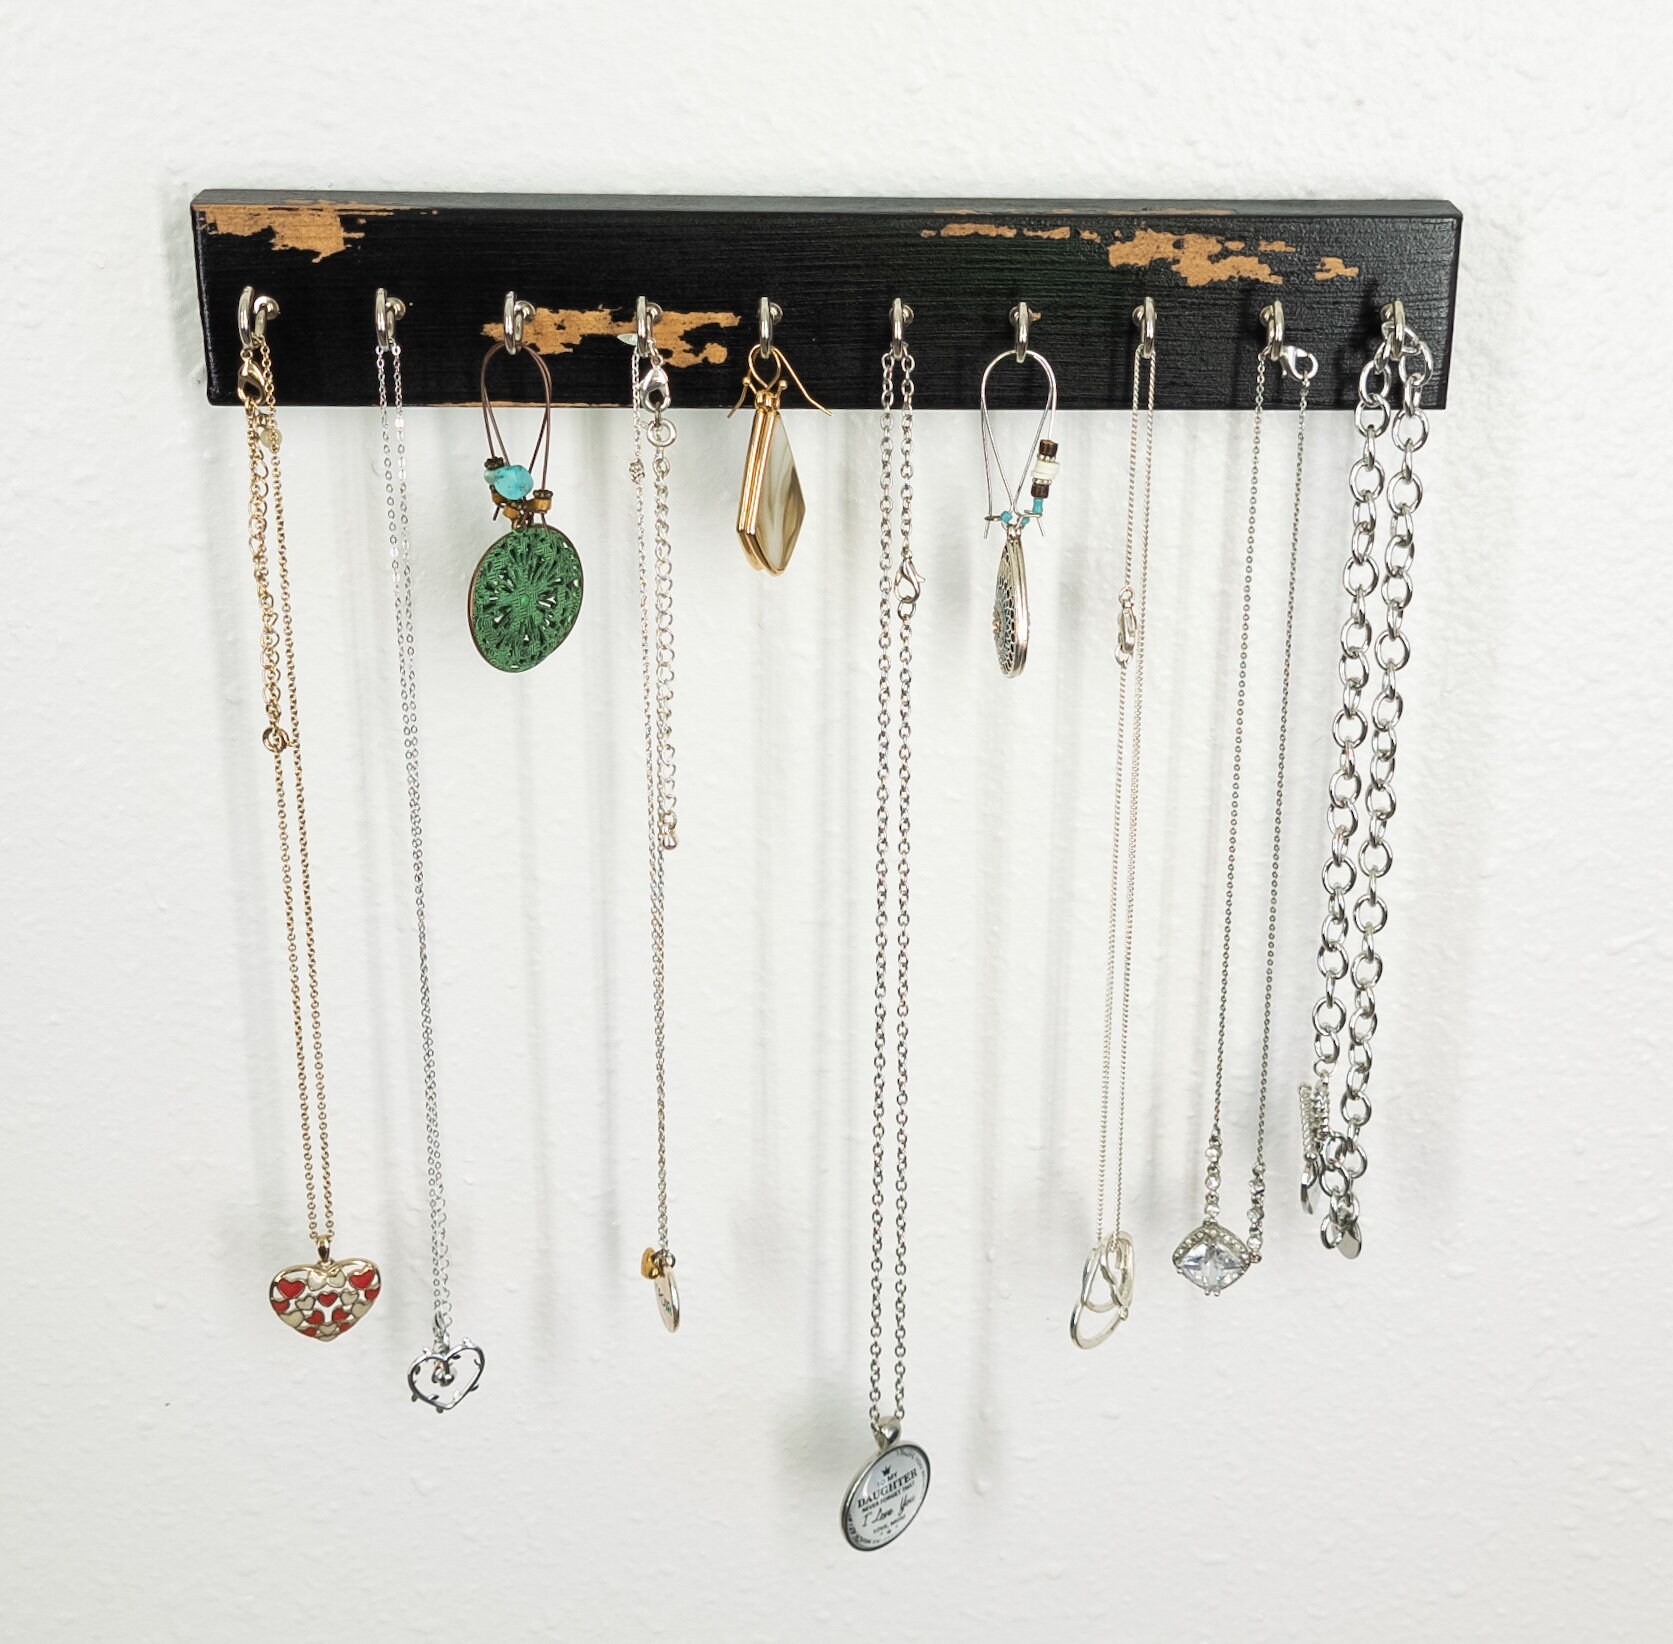 Wall Mounted Necklace Organizer Will Untangle Any Necklace